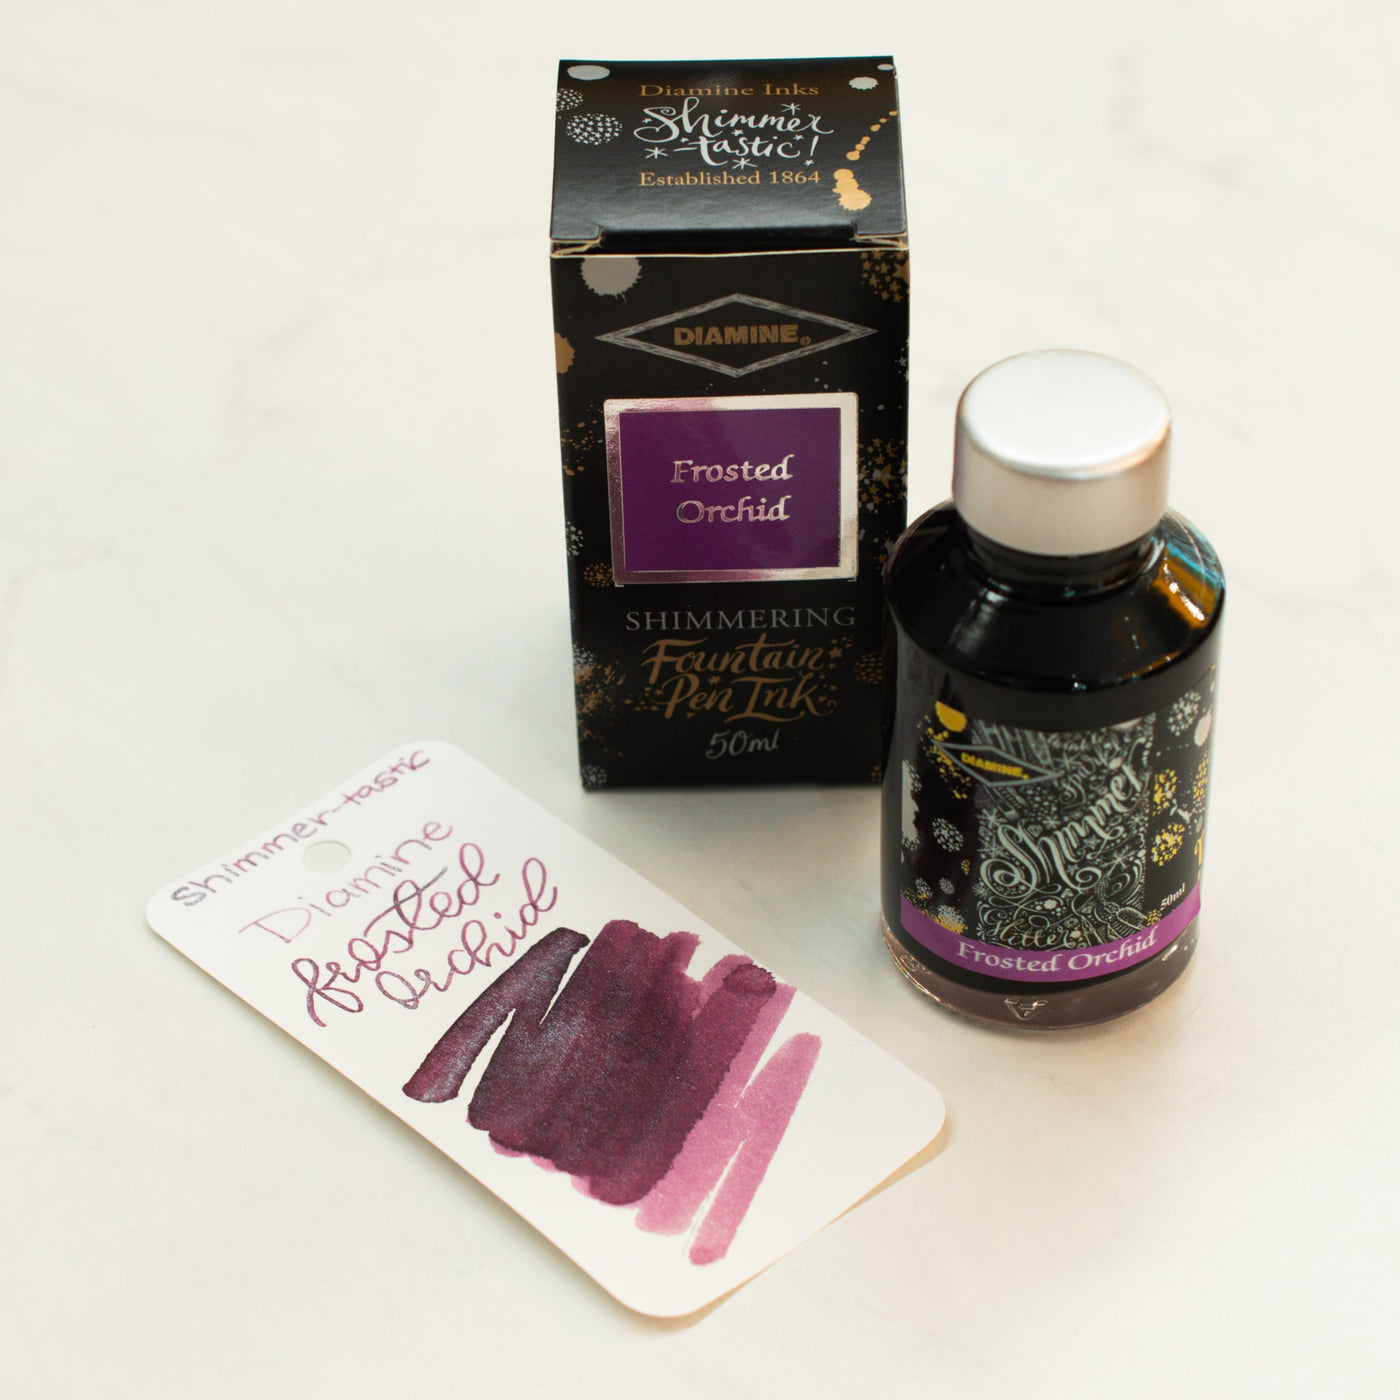 Diamine Shimmertastic Frosted Orchid Fountain Pen Ink Bottle